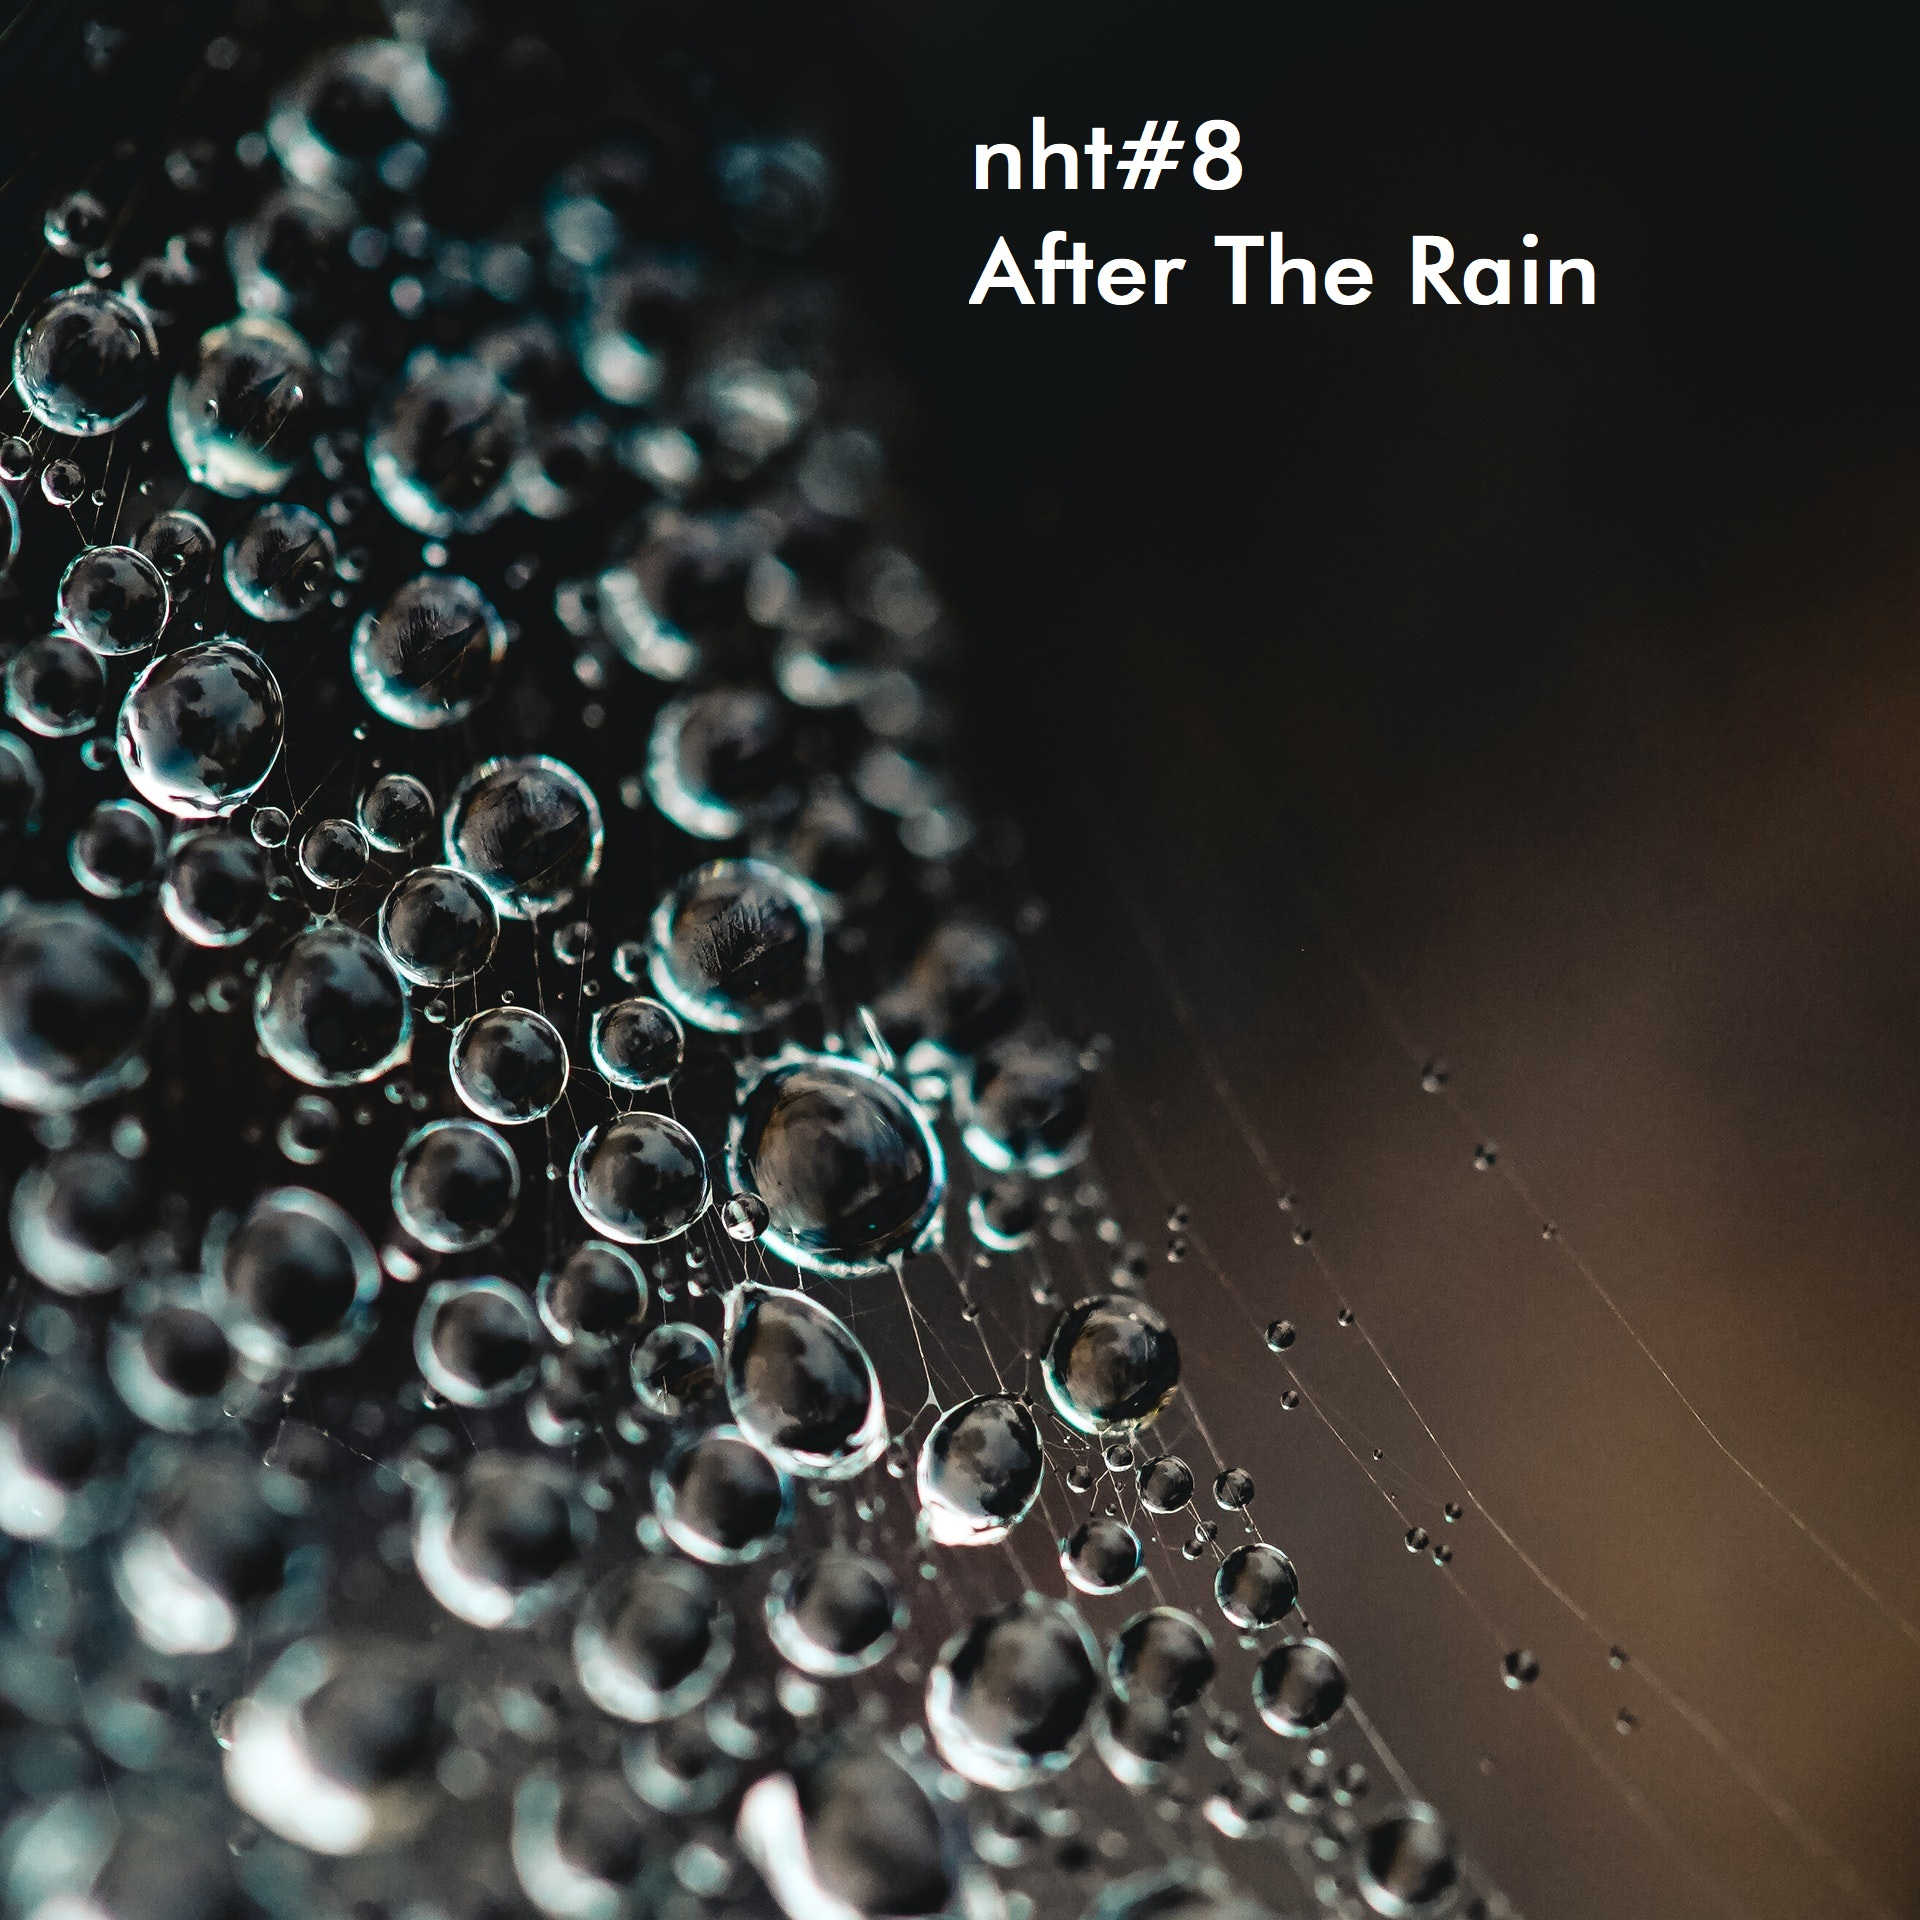 NHT#8... After The Rain